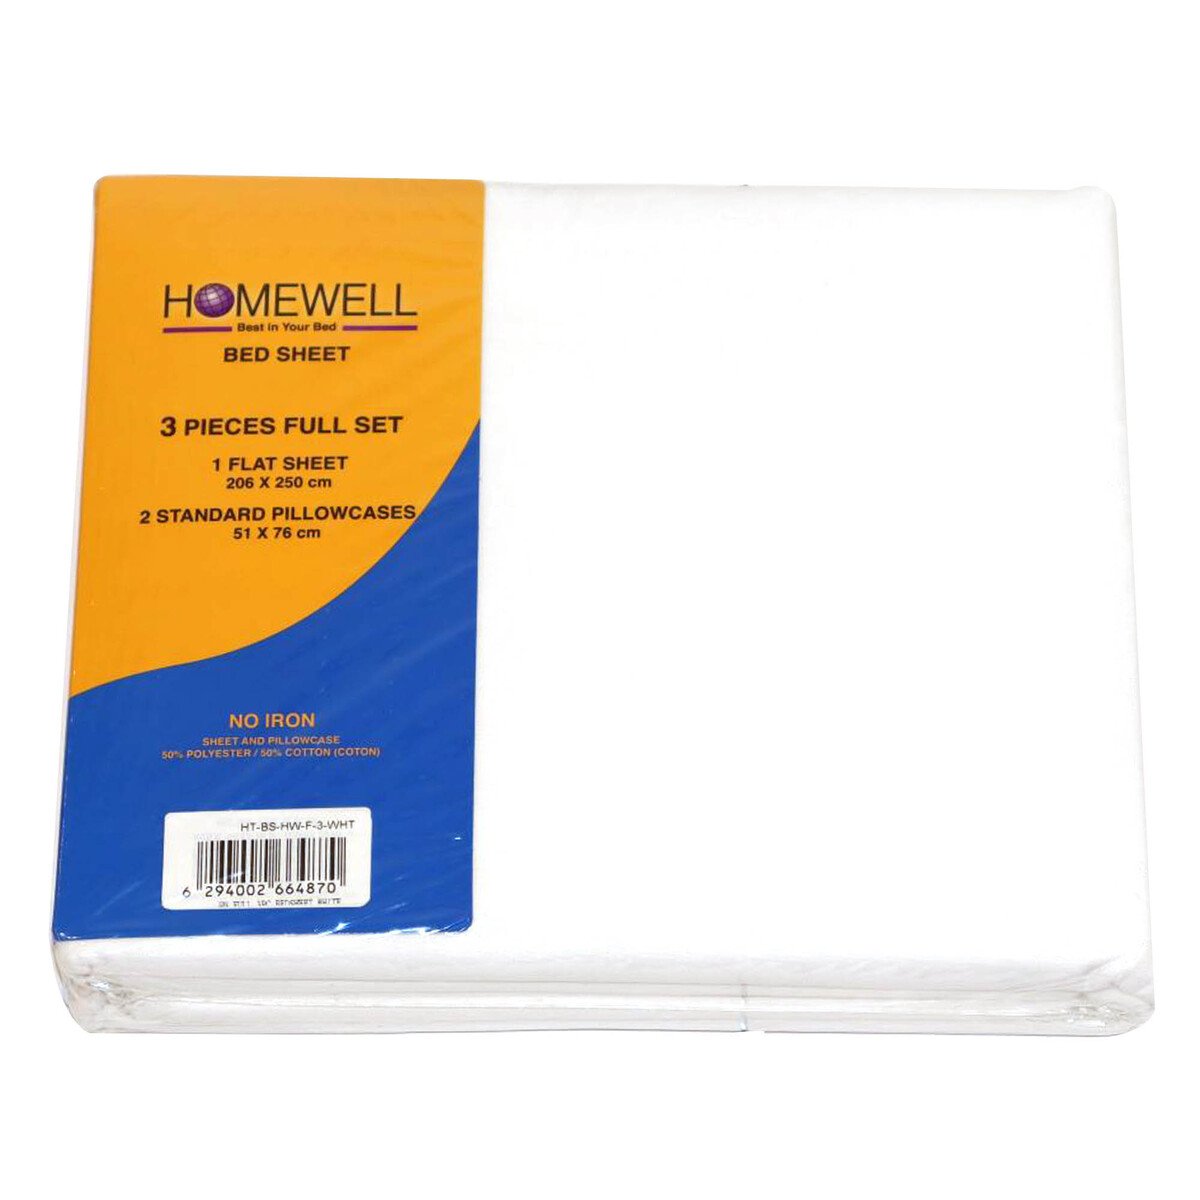 Homewell Bed Sheet Double 3pc 206x250cm White Color